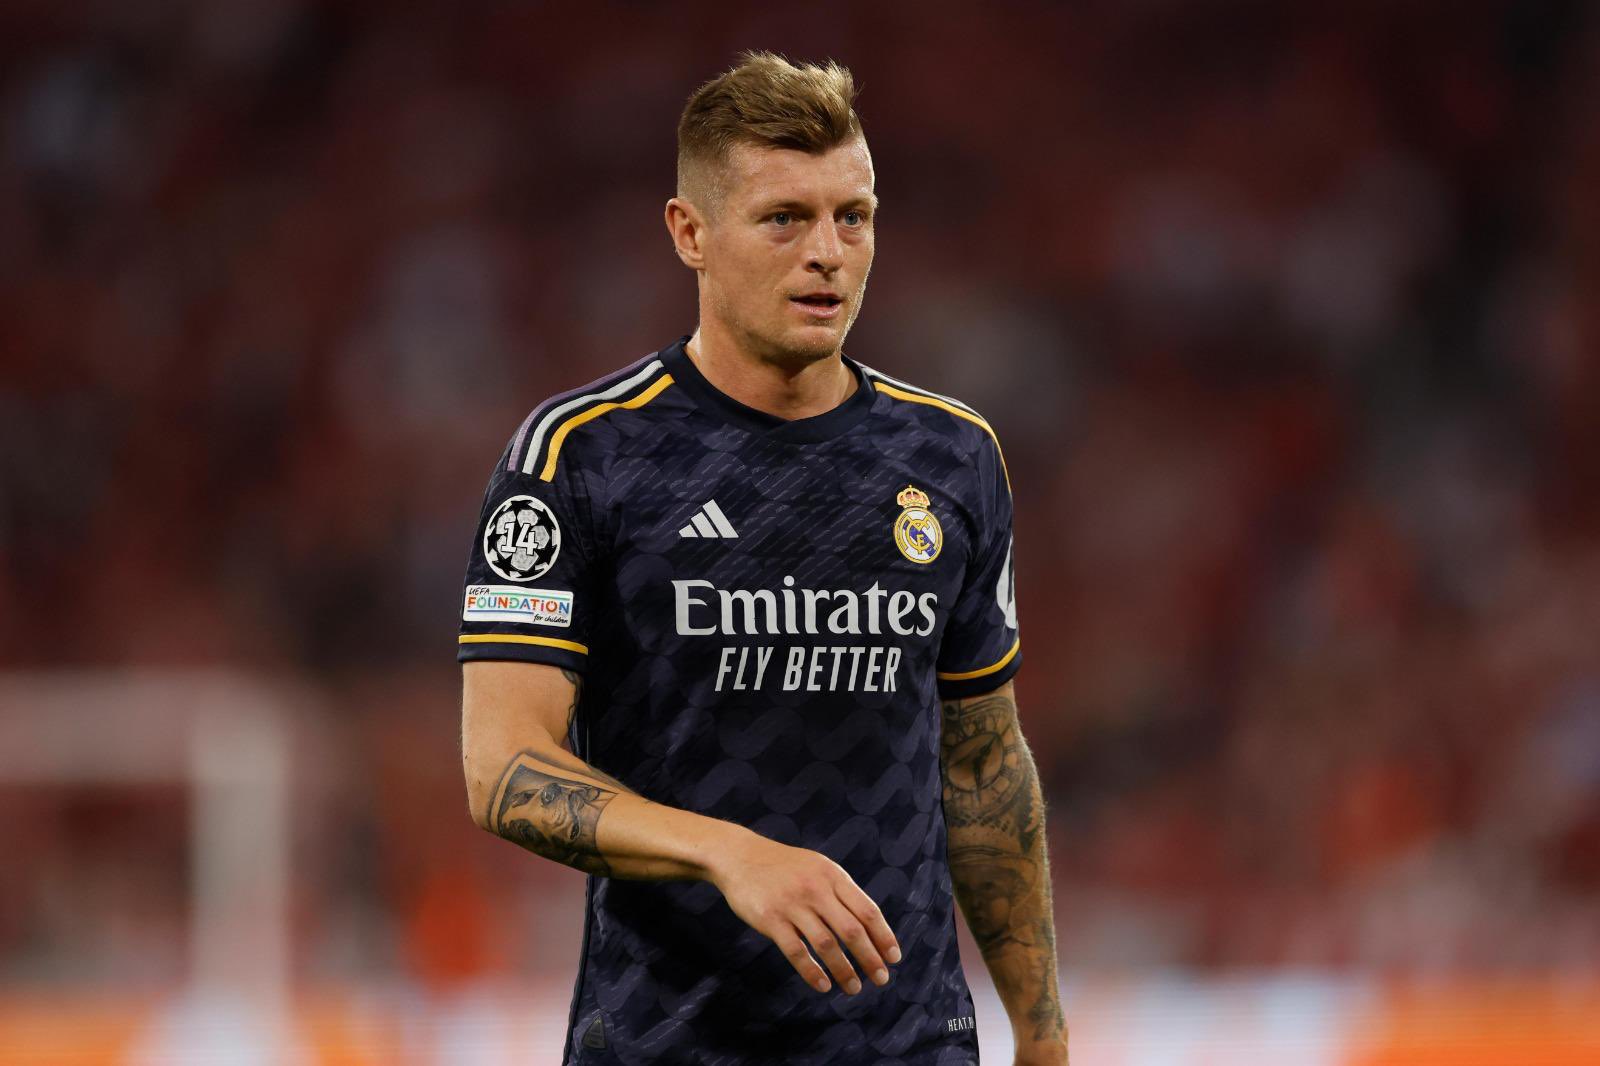 Toni Kroos pens final farewell to Real Madrid as contract expires